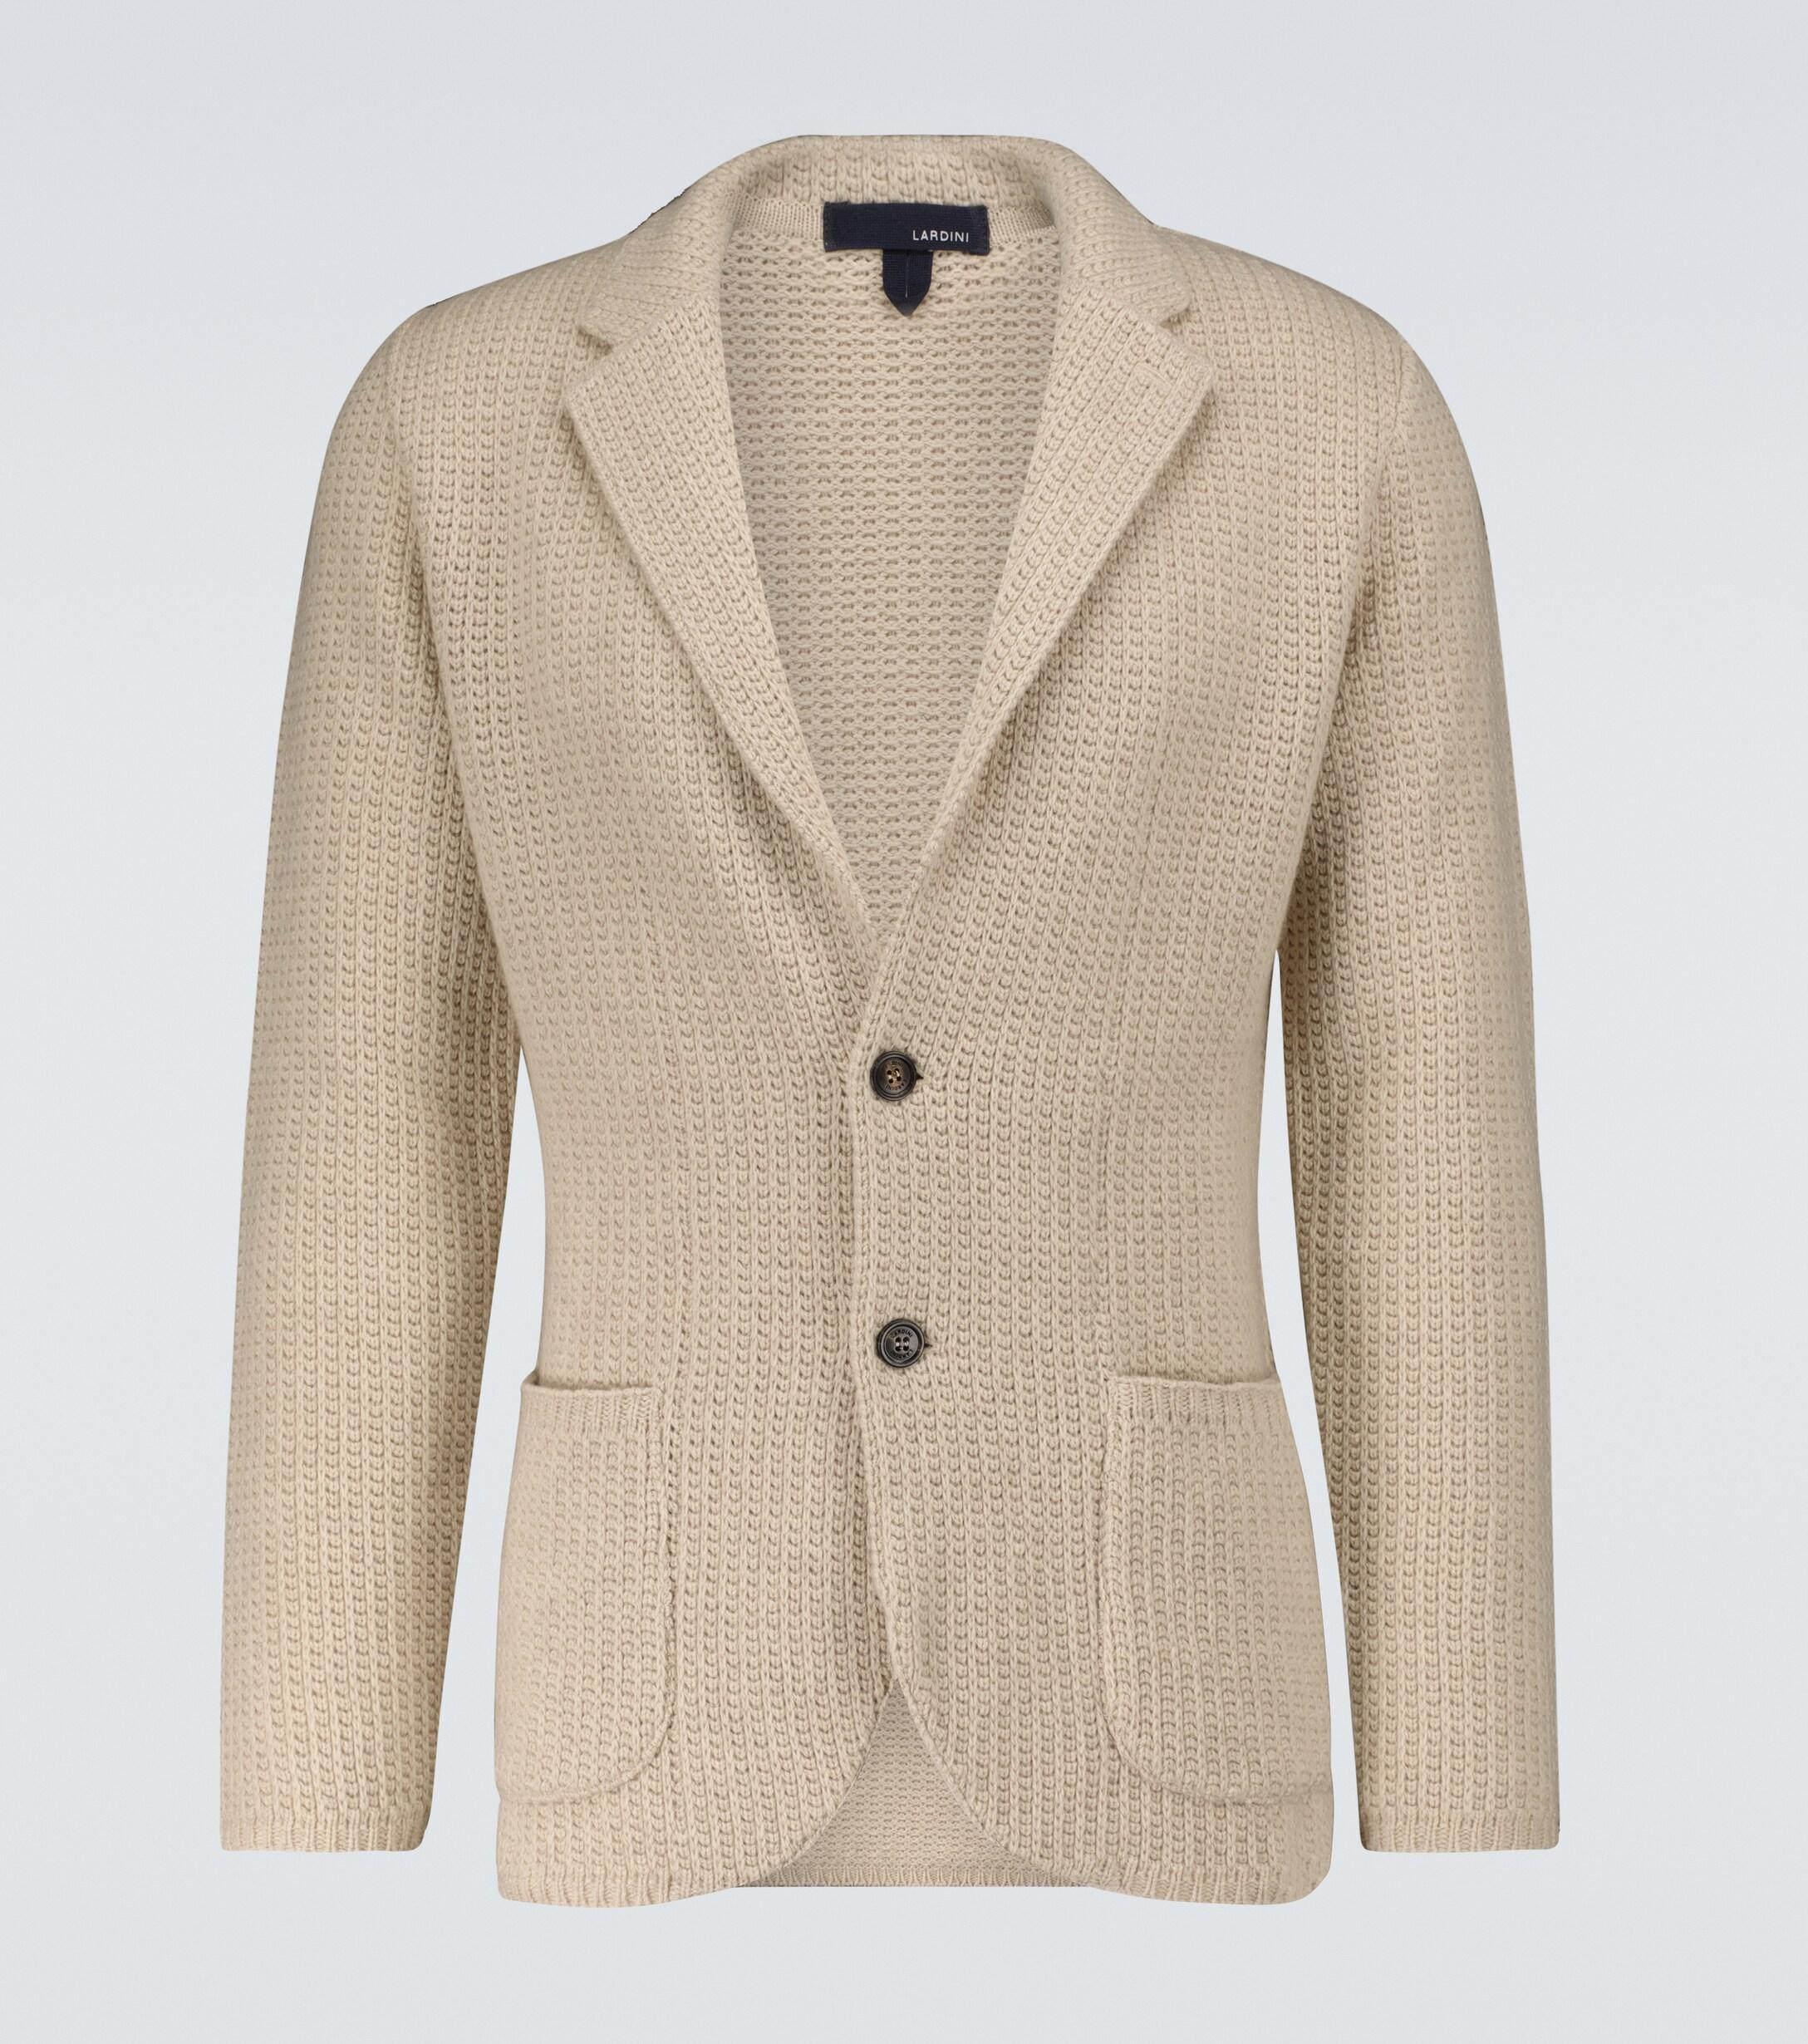 Lardini Knitted Cashmere Jacket in Natural for Men | Lyst Canada